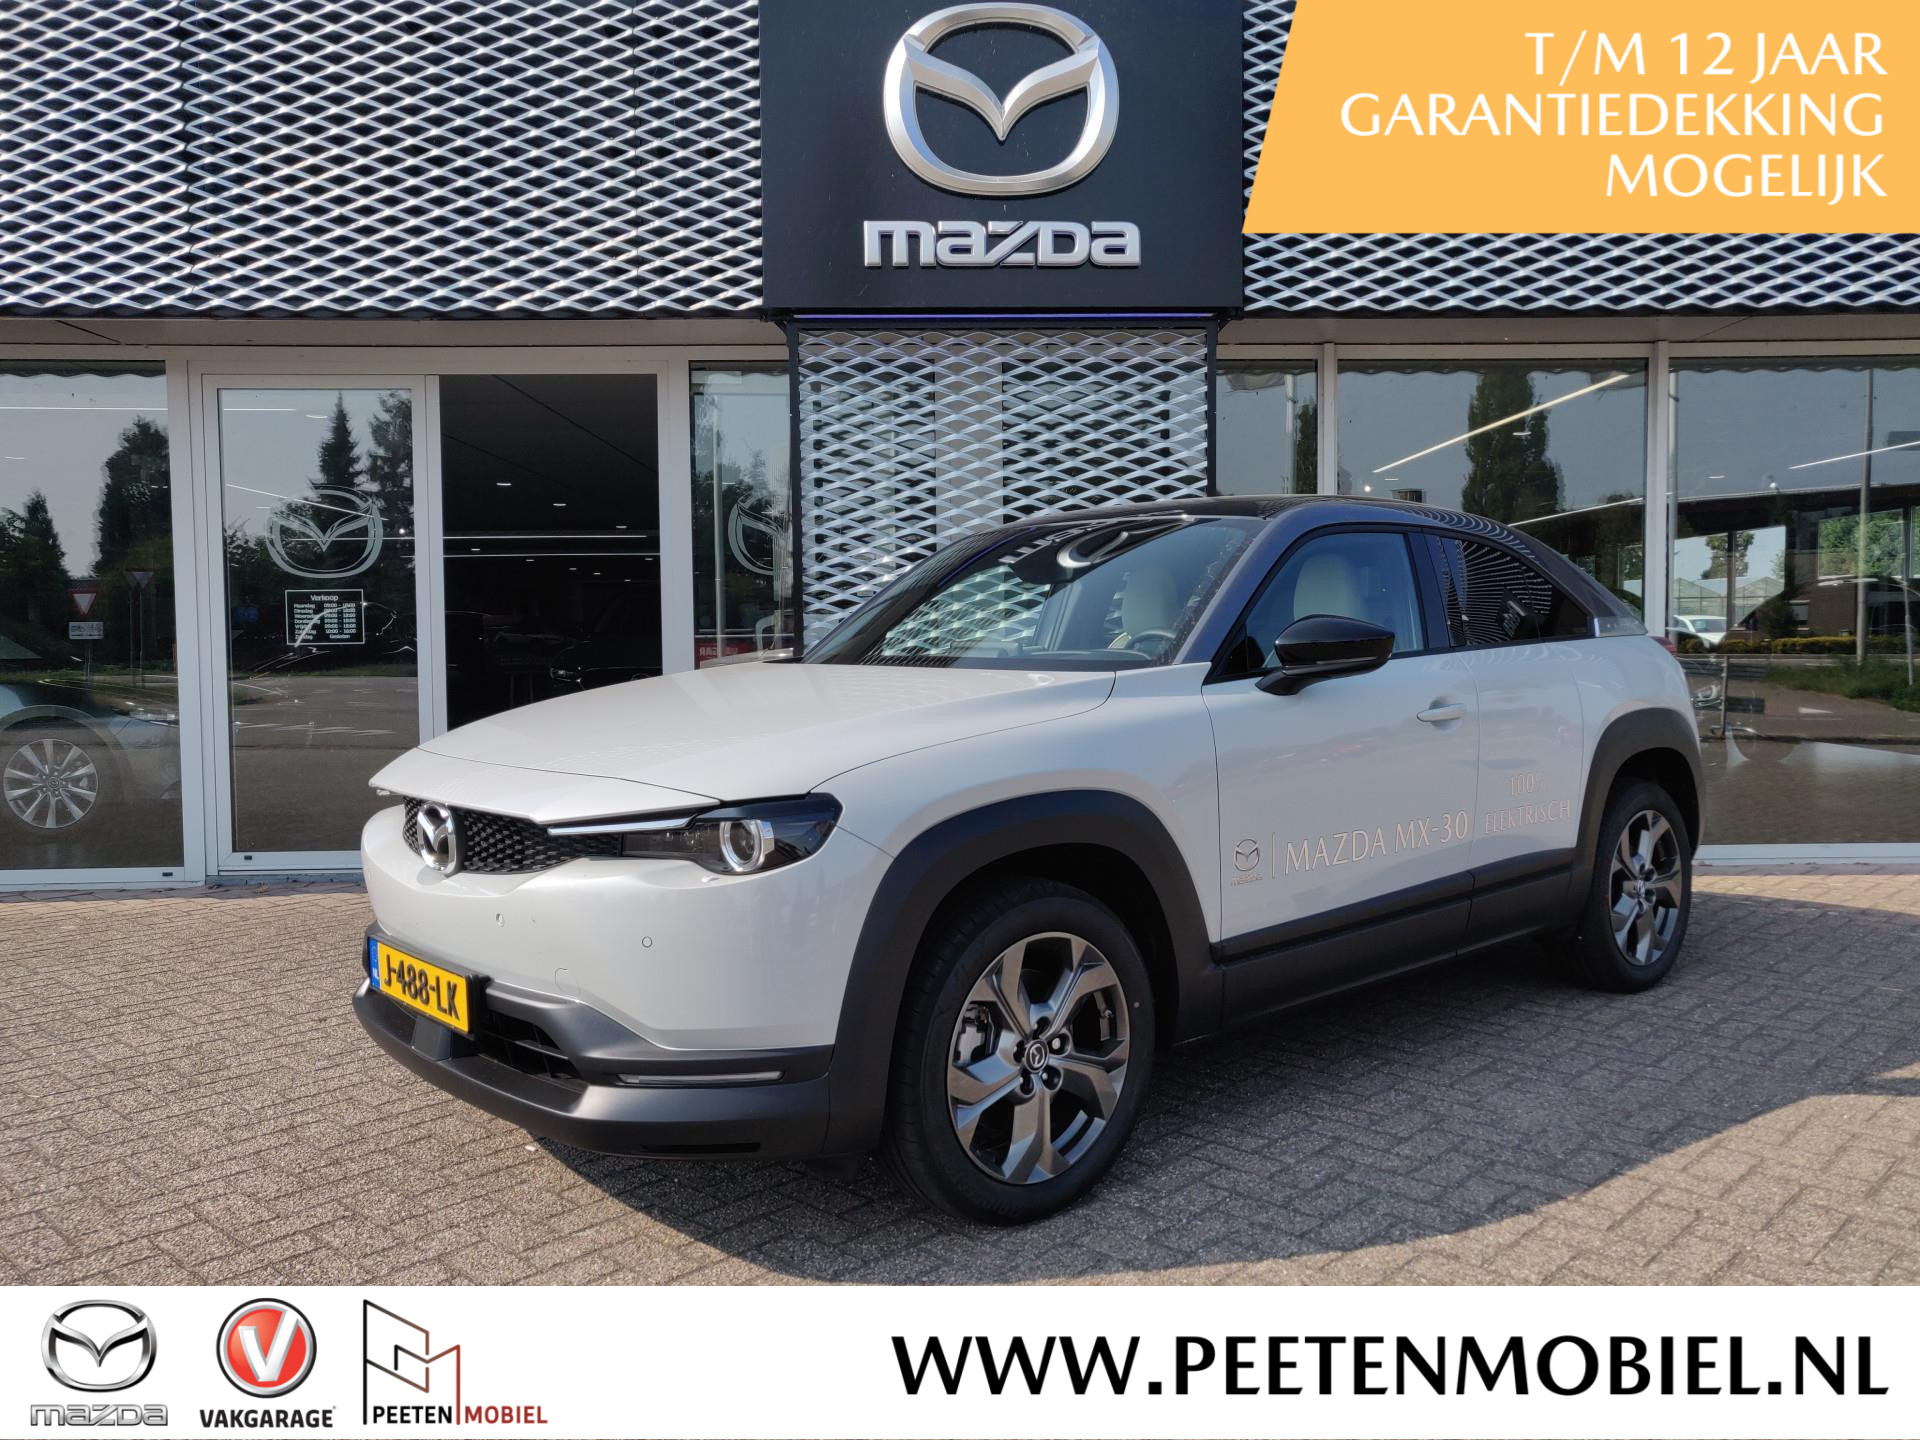 Mazda MX-30 E-Skyactiv 145 First Edition Automaat | BTW AUTO | PARTICULIERE SUBSIDIE €. 2.000,- bij viaBOVAG.nl